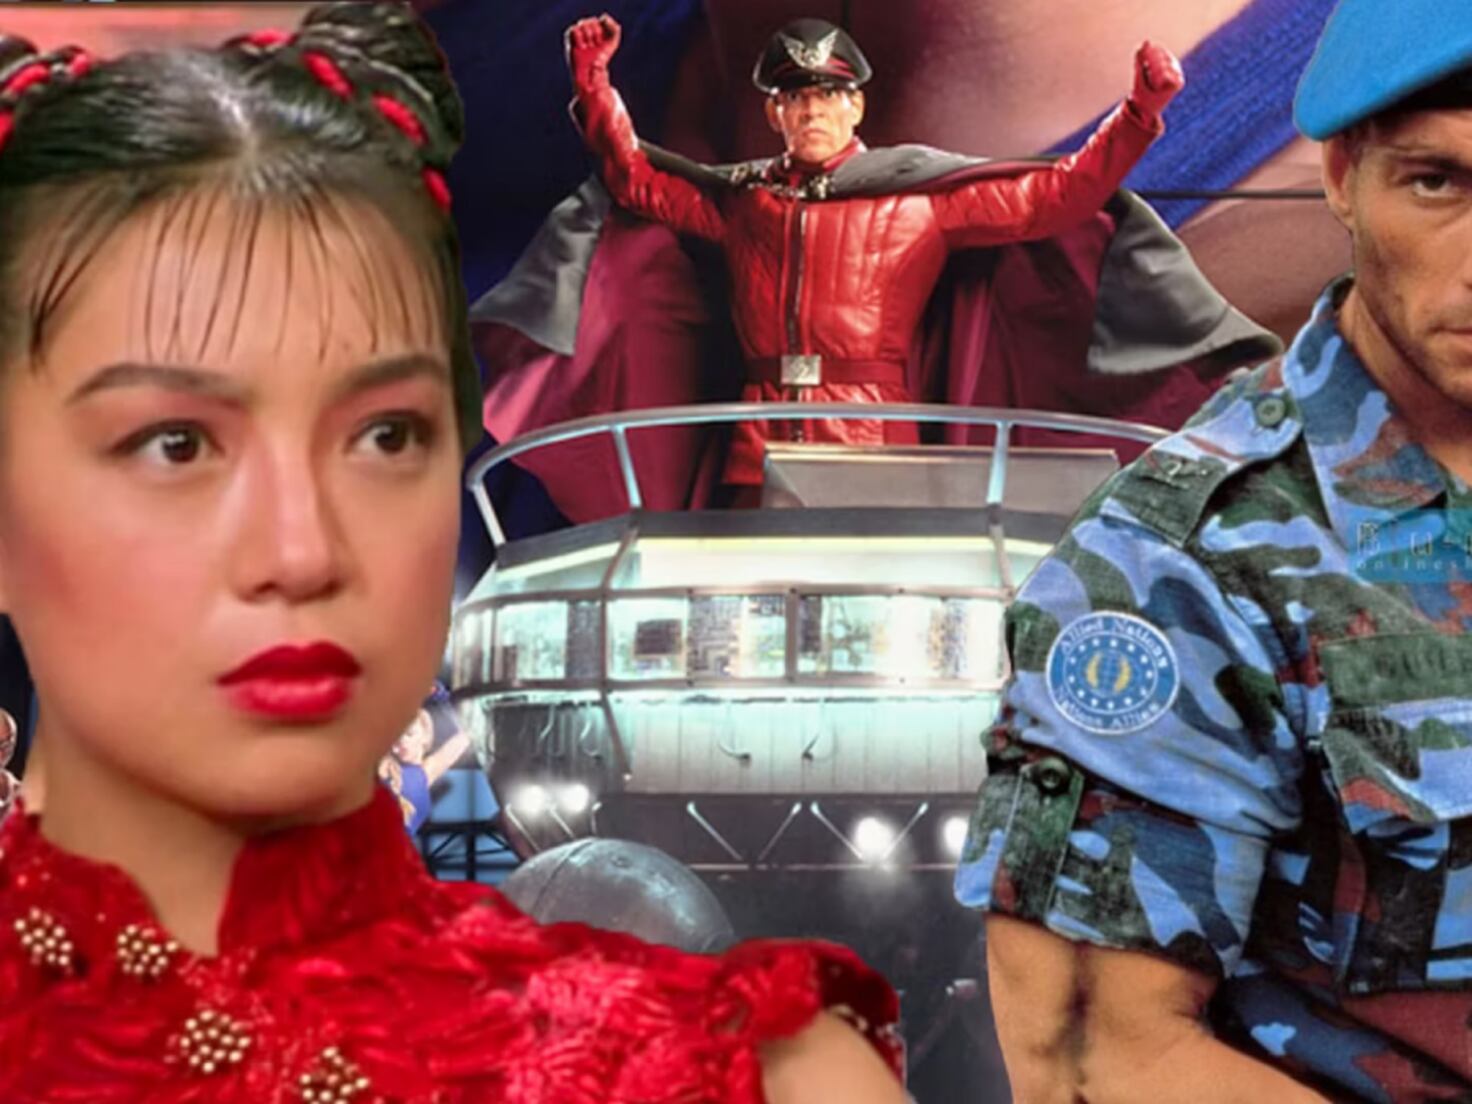 A new Street Fighter movie is in production